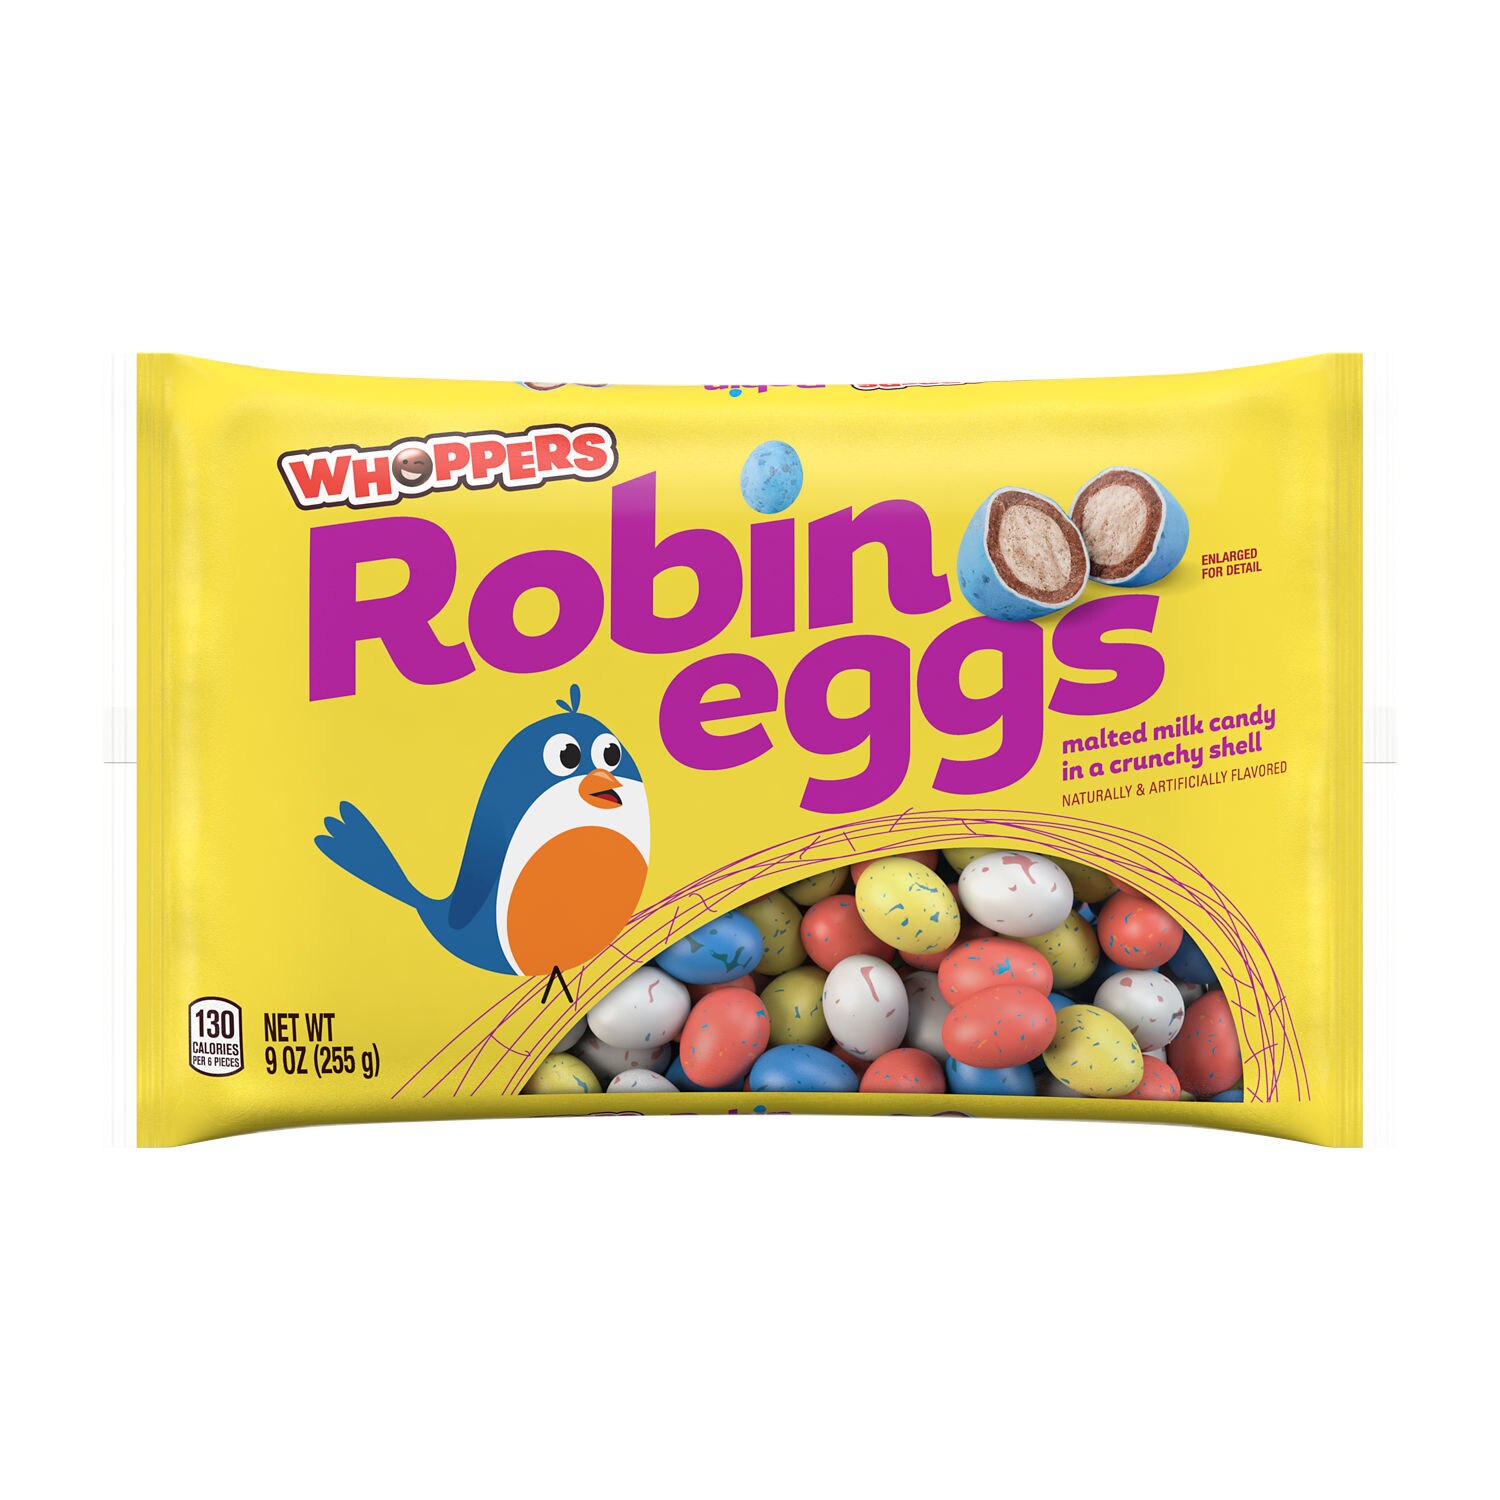 Whoppers Robin Eggs Malted Milk In Crunchy Shells Treat, Easter Candy, 9 Oz , CVS